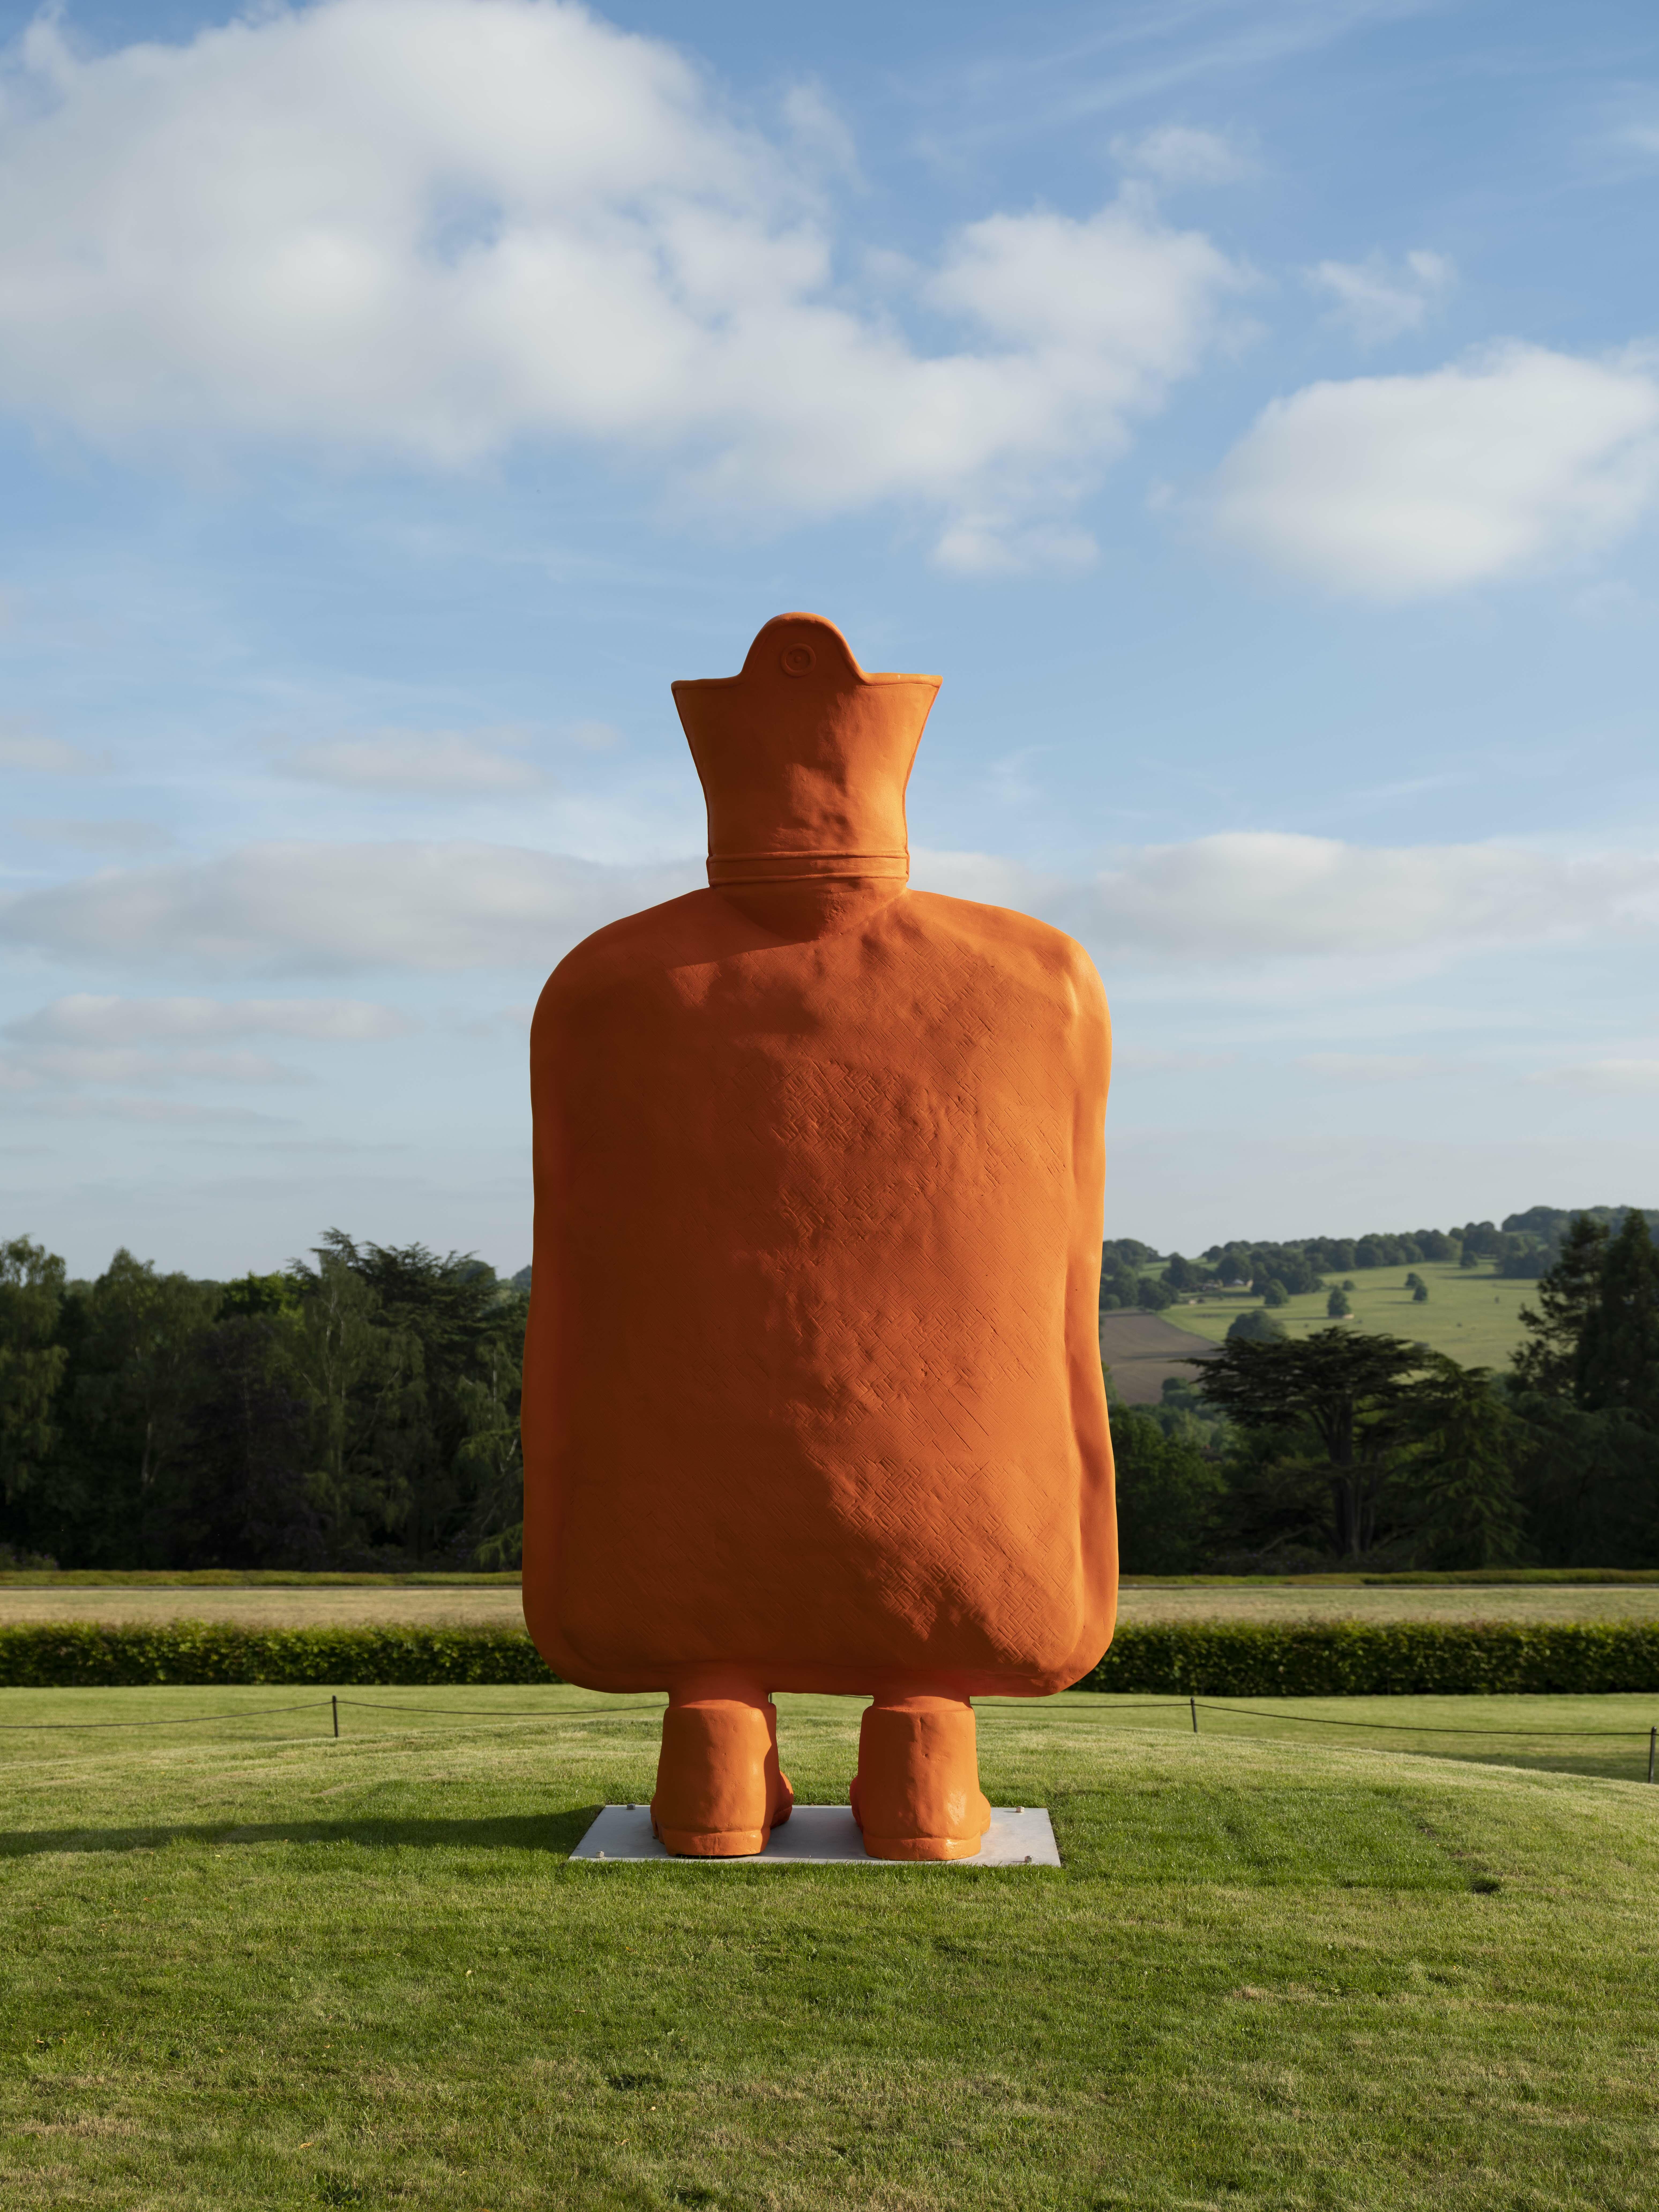 A giant orange hot water bottle with legs.